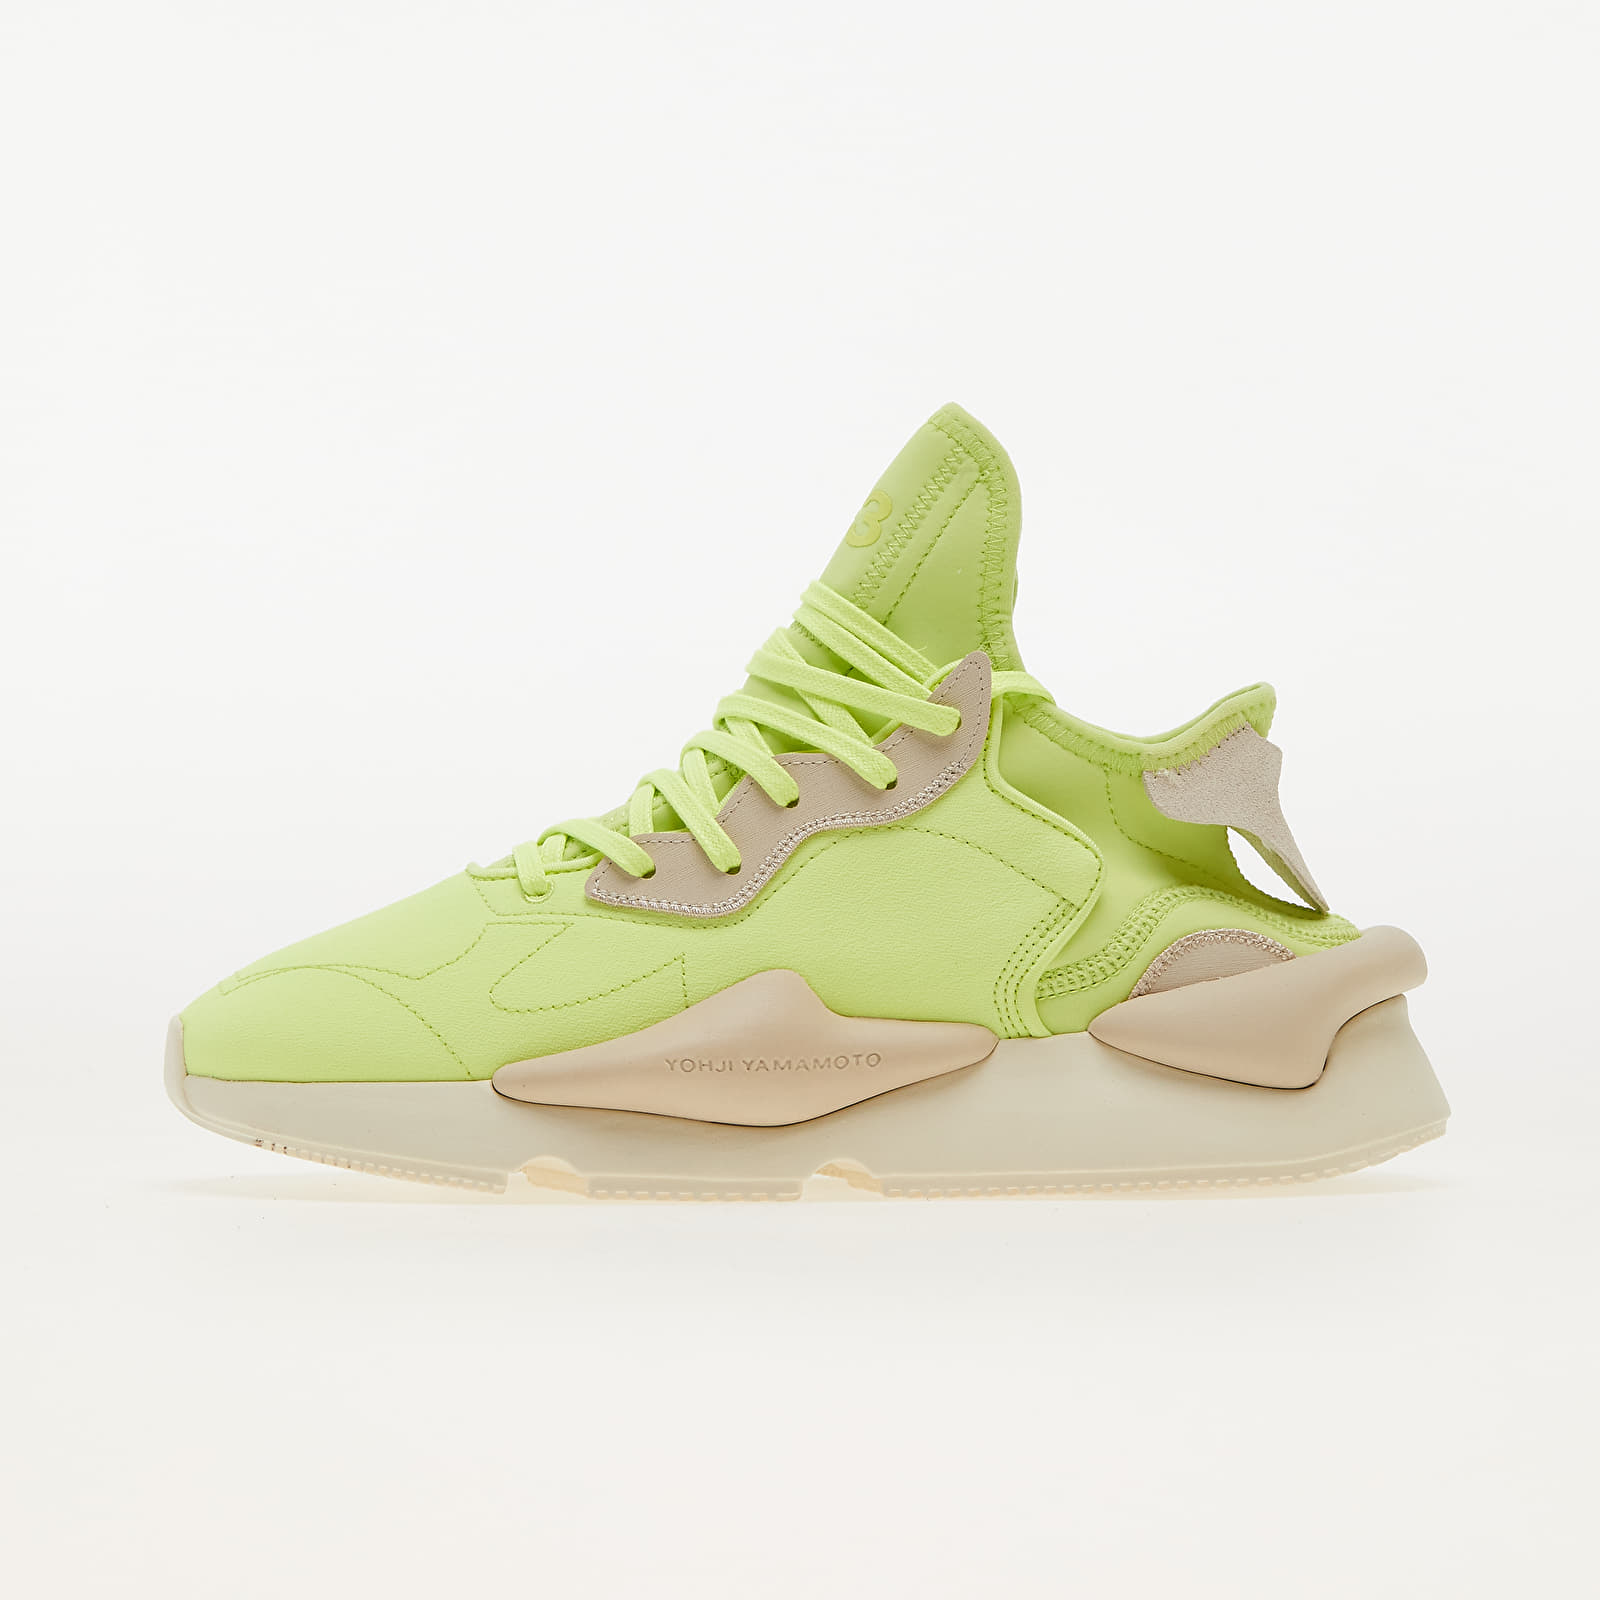 Chaussures et baskets homme Y-3 Kaiwa Semi Frozen Yellow/ Off White/ Clear Brown